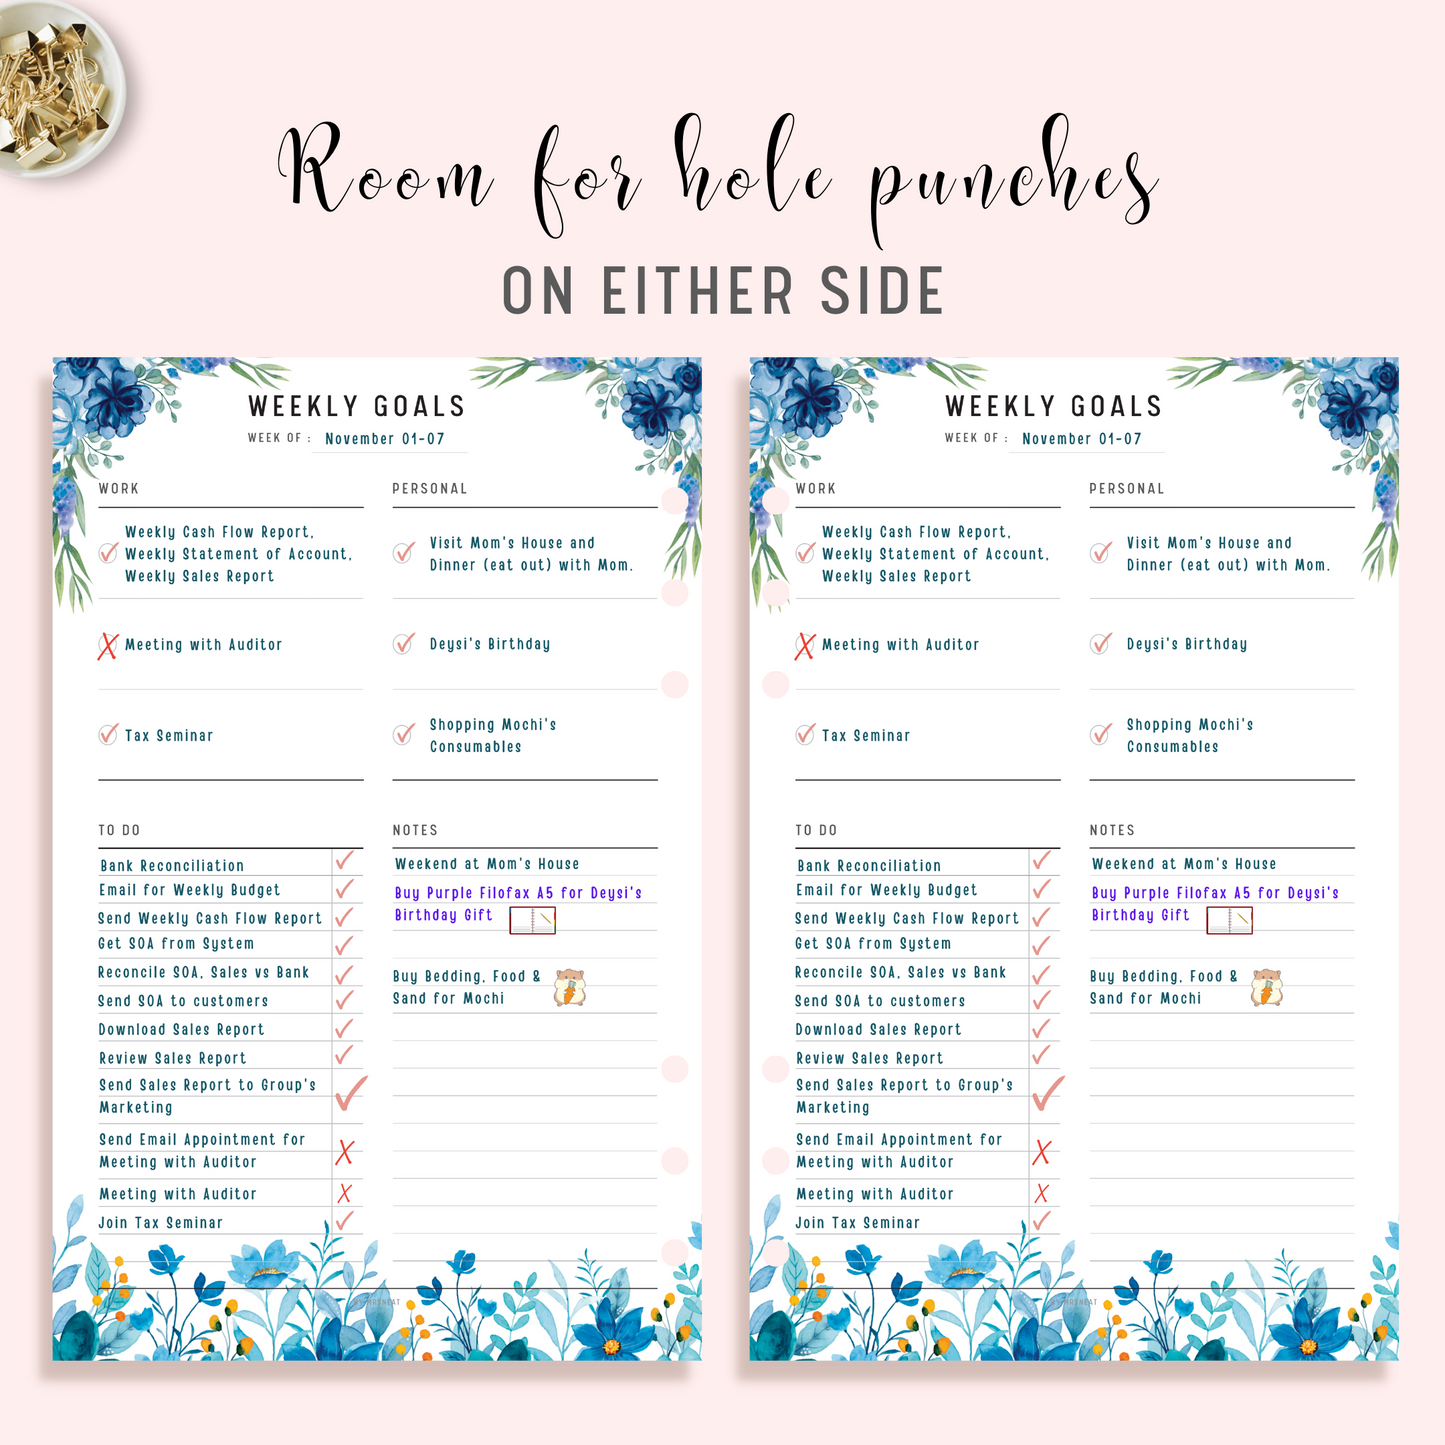 Blue Floral Weekly Goal Tracker Planner Printable with room for hole punches on either side